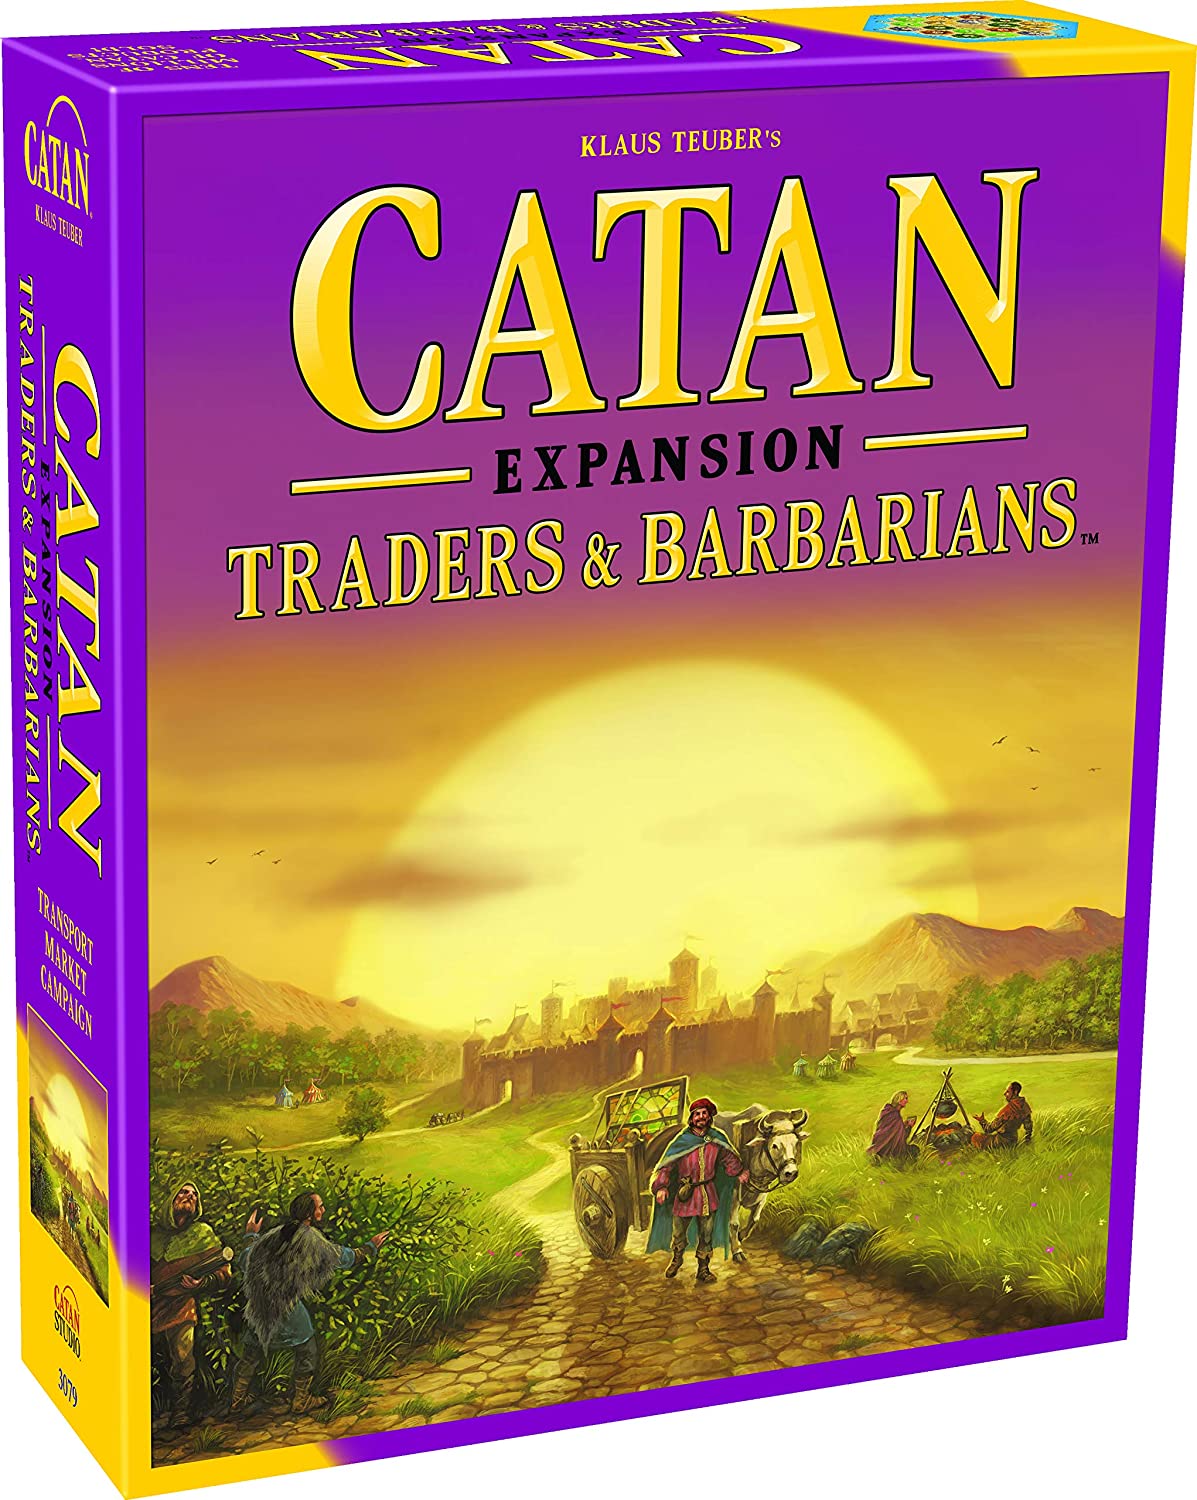 Catan Traders and Barbarians Board Game Expansion